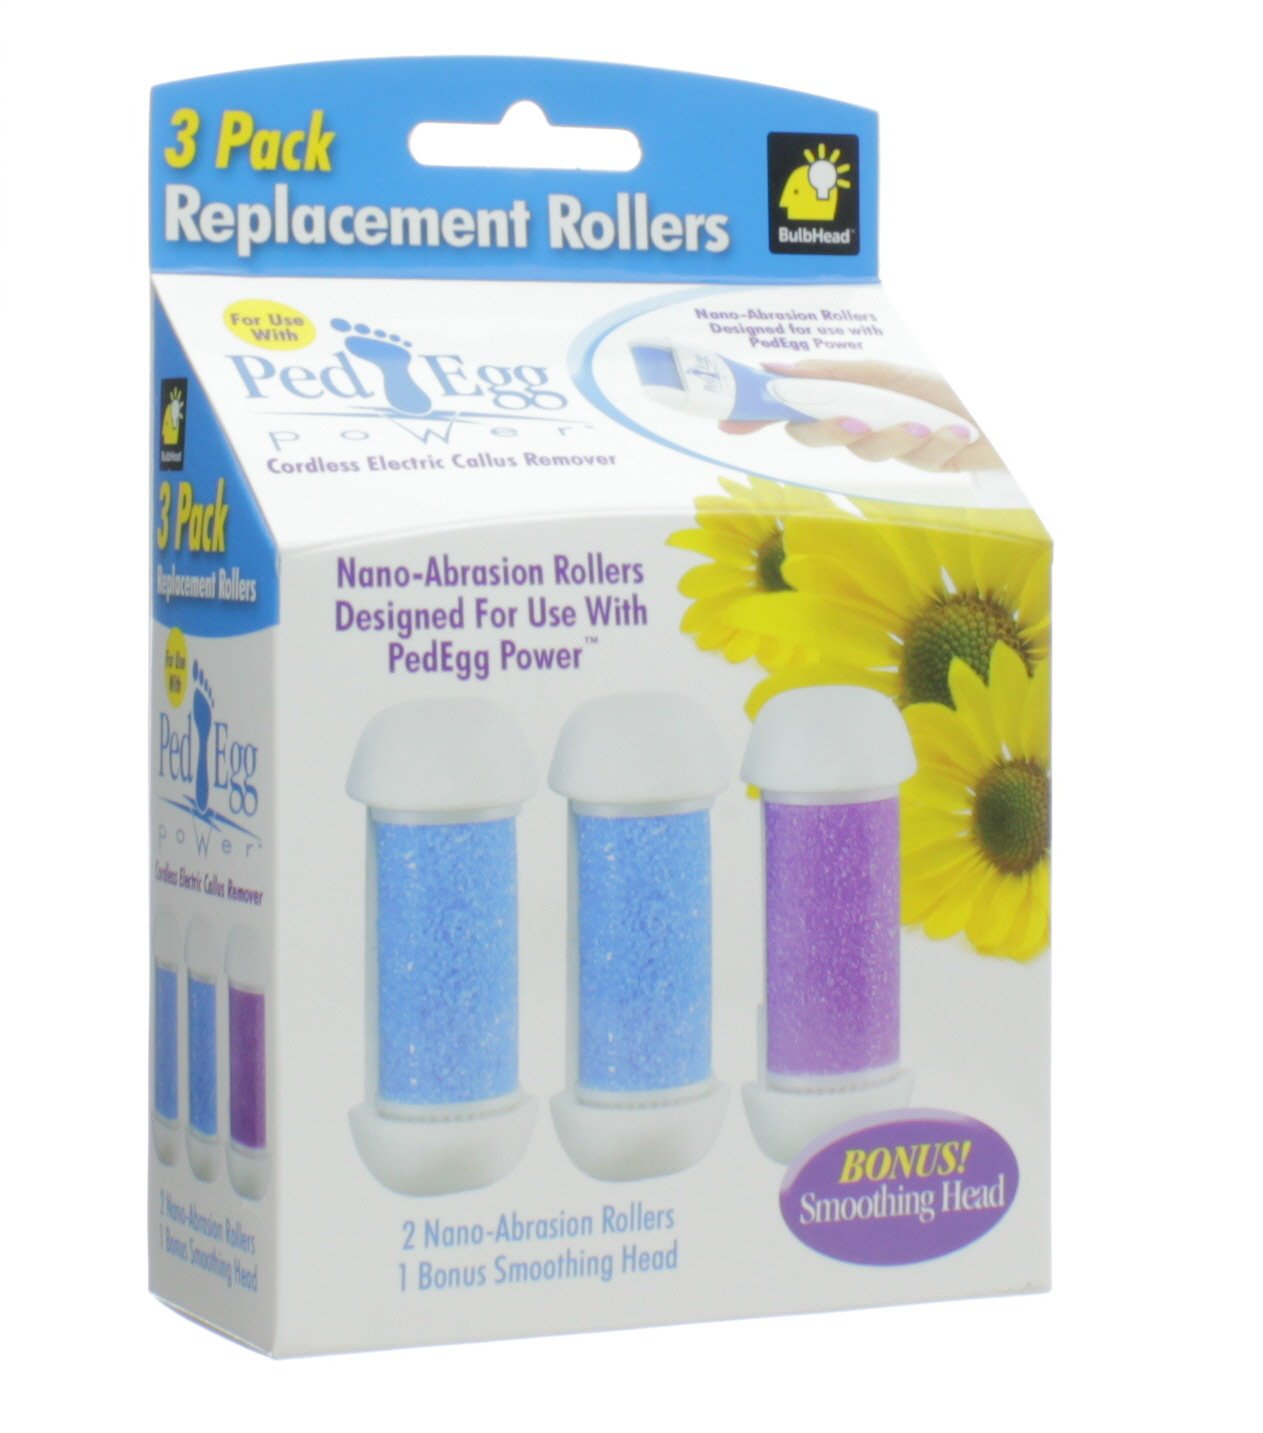 Ped Egg Power Replacement Rollers